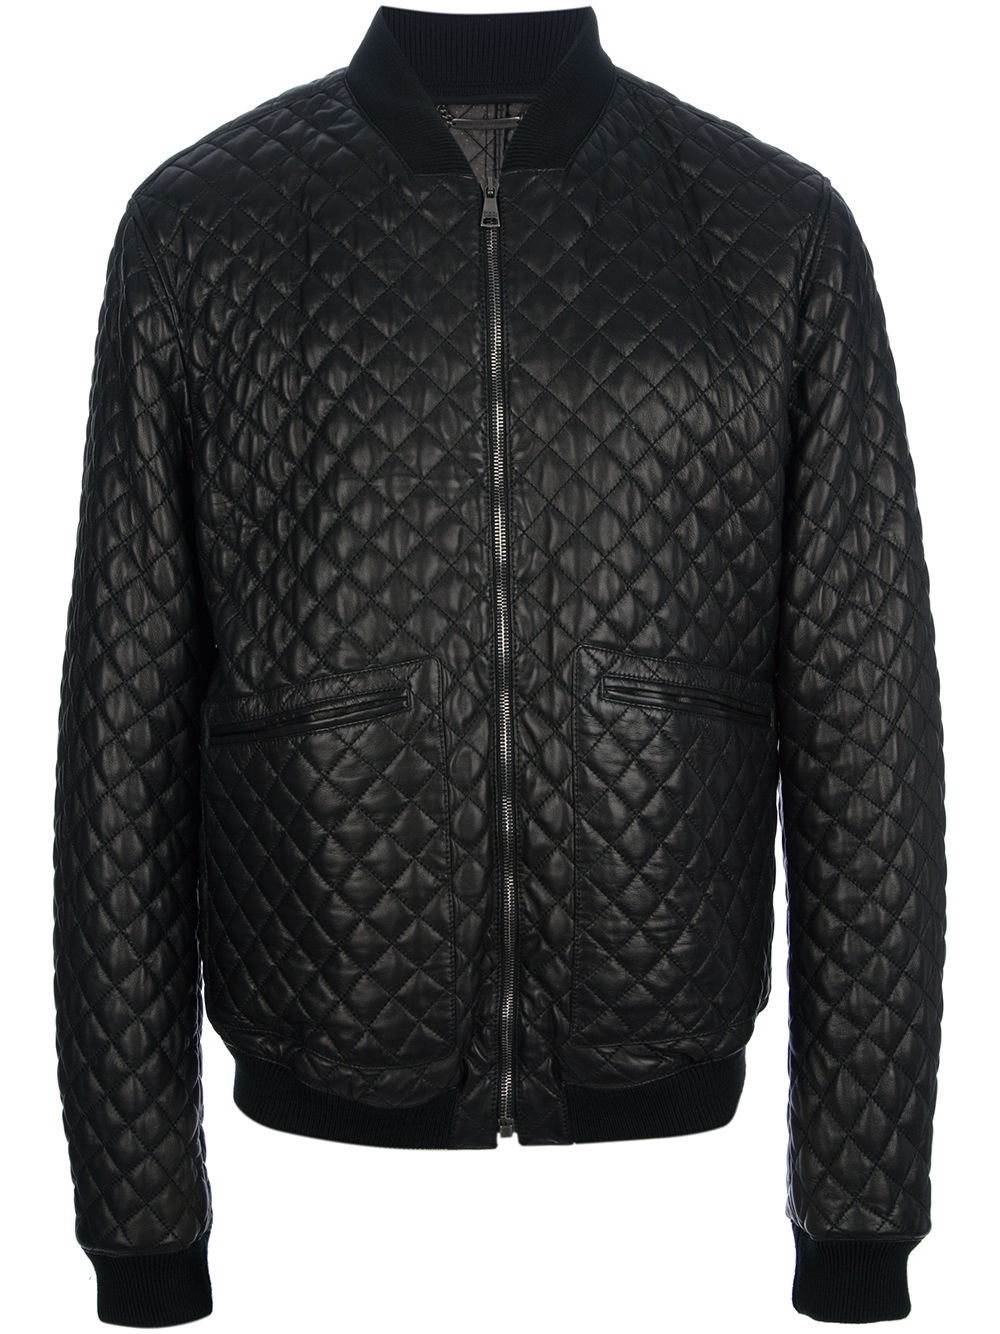 Lyst - Dolce & Gabbana Quilted Bomber Jacket in Black for Men